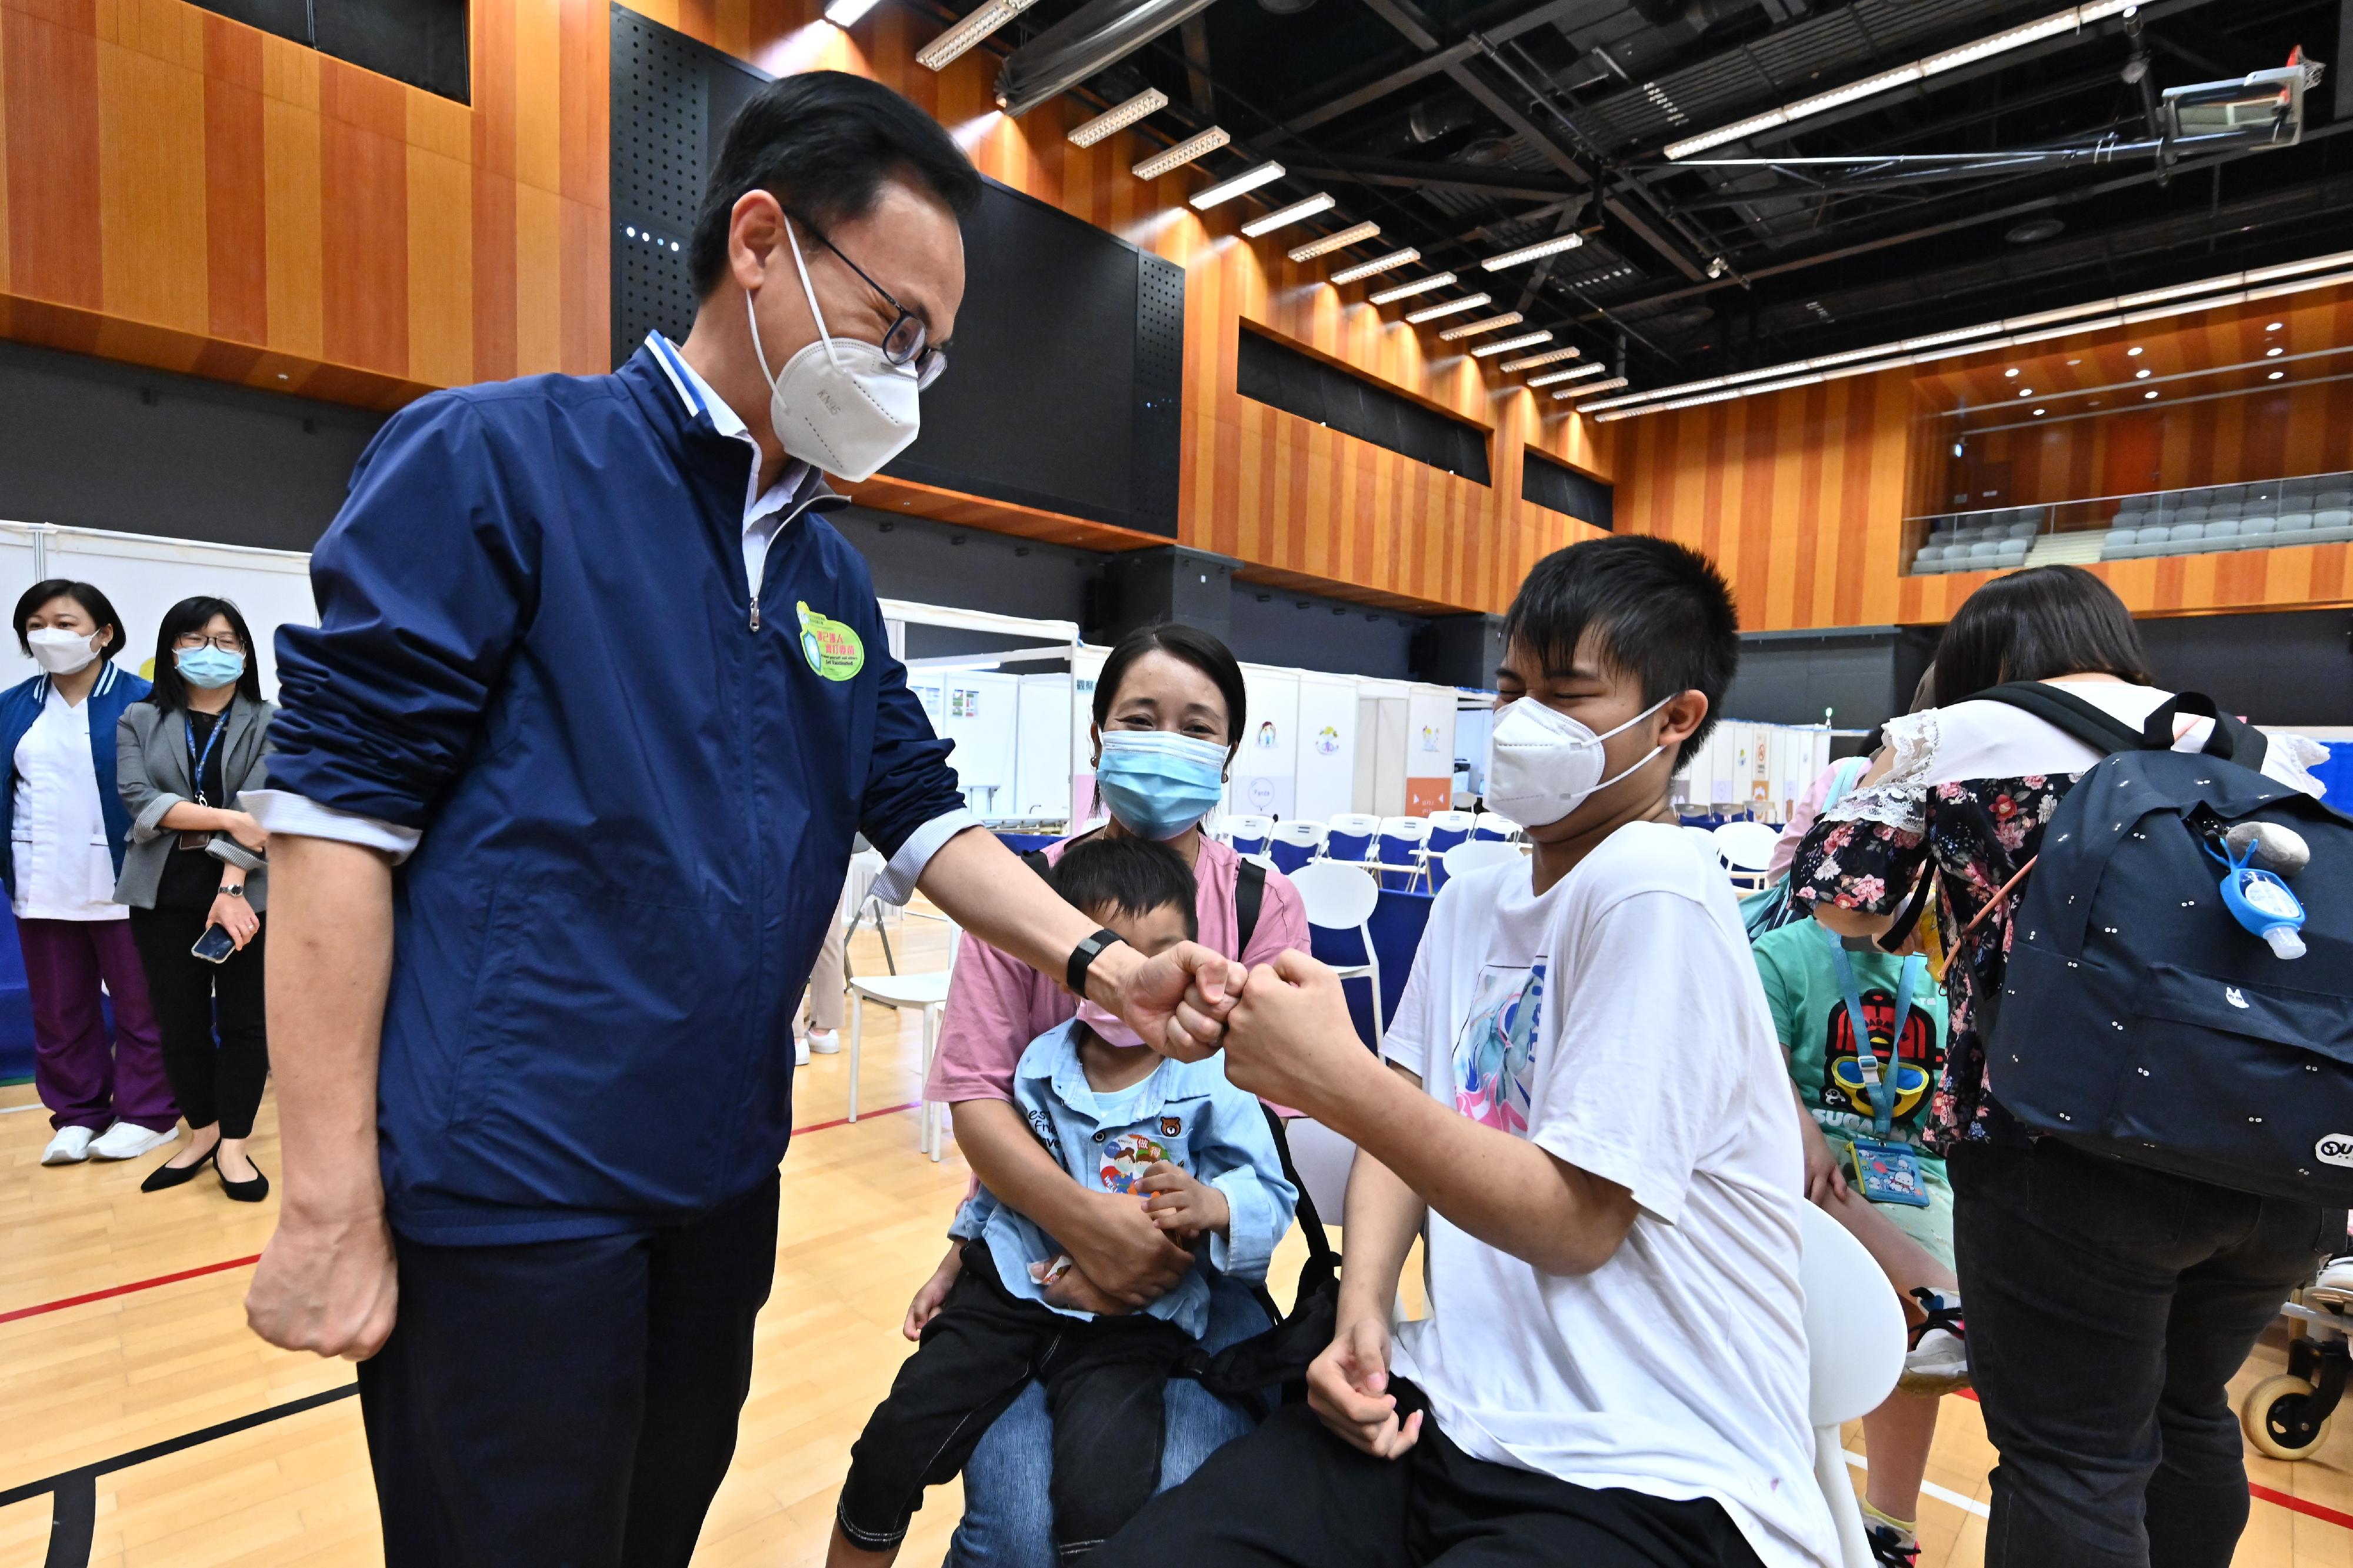 Around 300 students from 37 special schools were arranged to receive the BioNTech vaccine at the Children Community Vaccination Centres (CCVCs) at Yuen Chau Kok Sports Centre in Sha Tin and Hong Kong Children's Hospital in Kowloon Bay at special booking time slots this morning (April 27). Photo shows the Secretary for the Civil Service, Mr Patrick Nip (left), giving encouragement to a student (right) who just received his COVID-19 vaccine at the CCVC at Yuen Chau Kok Sports Centre.